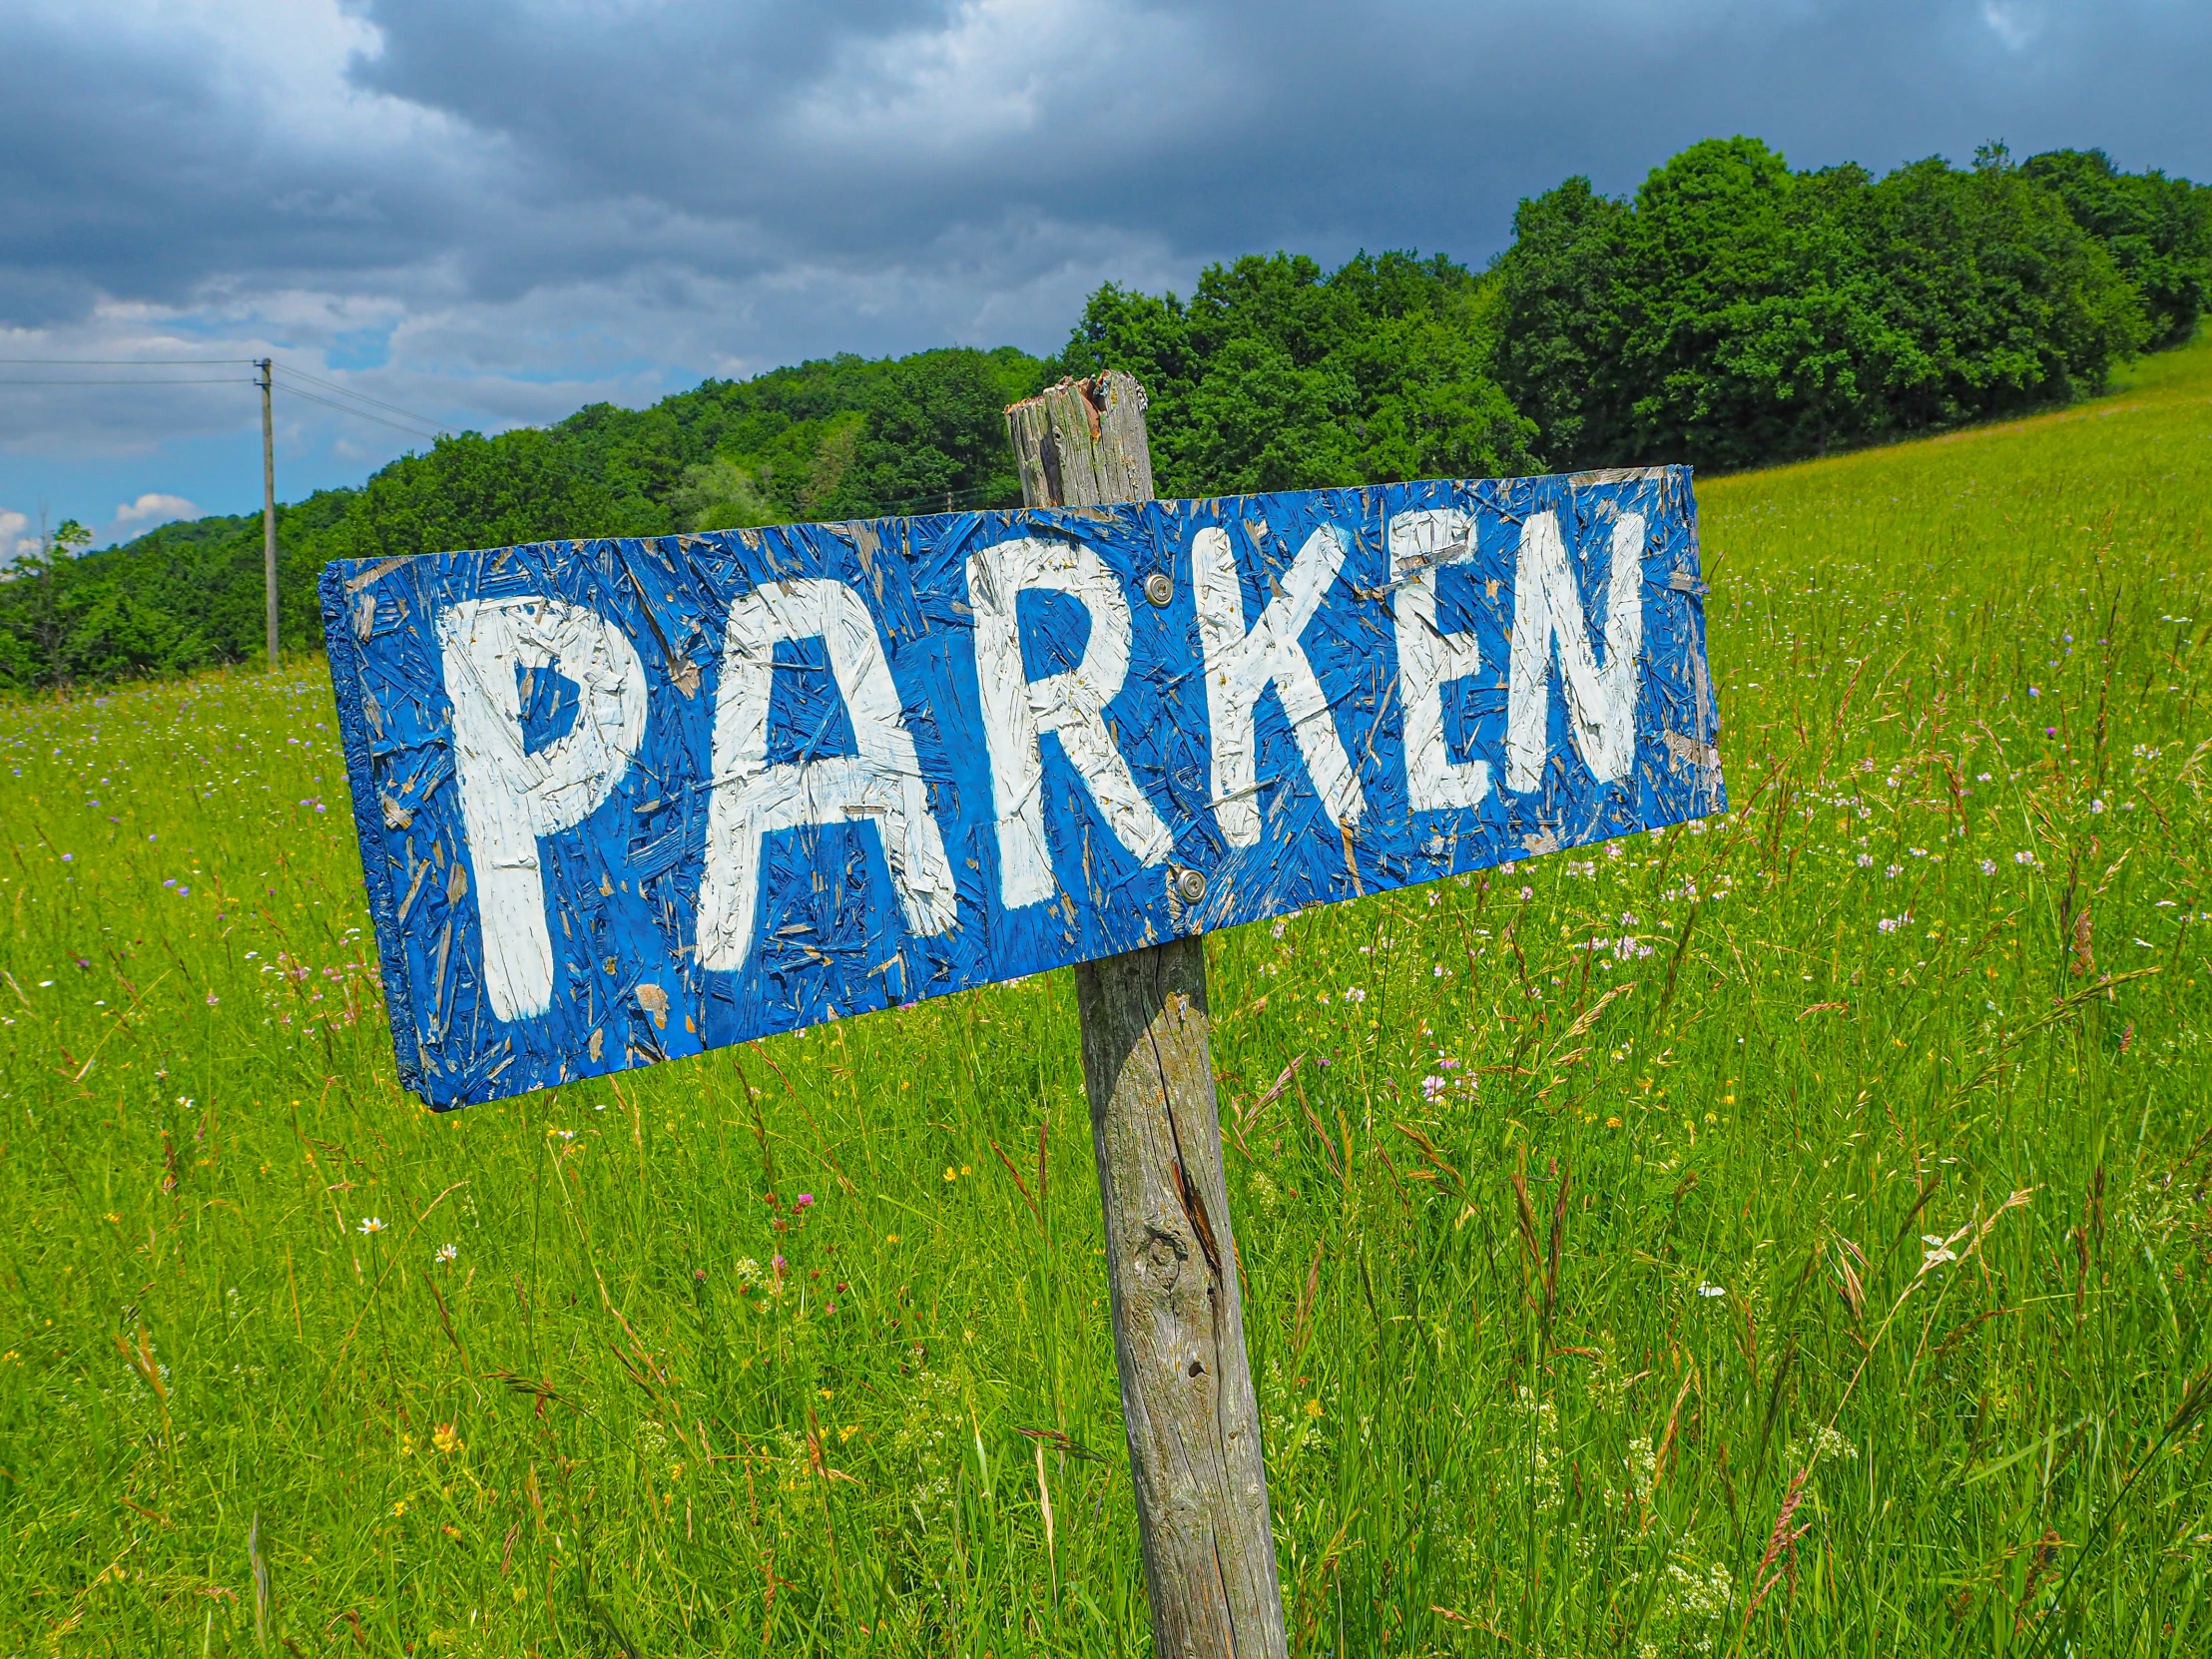 there is a blue street sign with the word parken